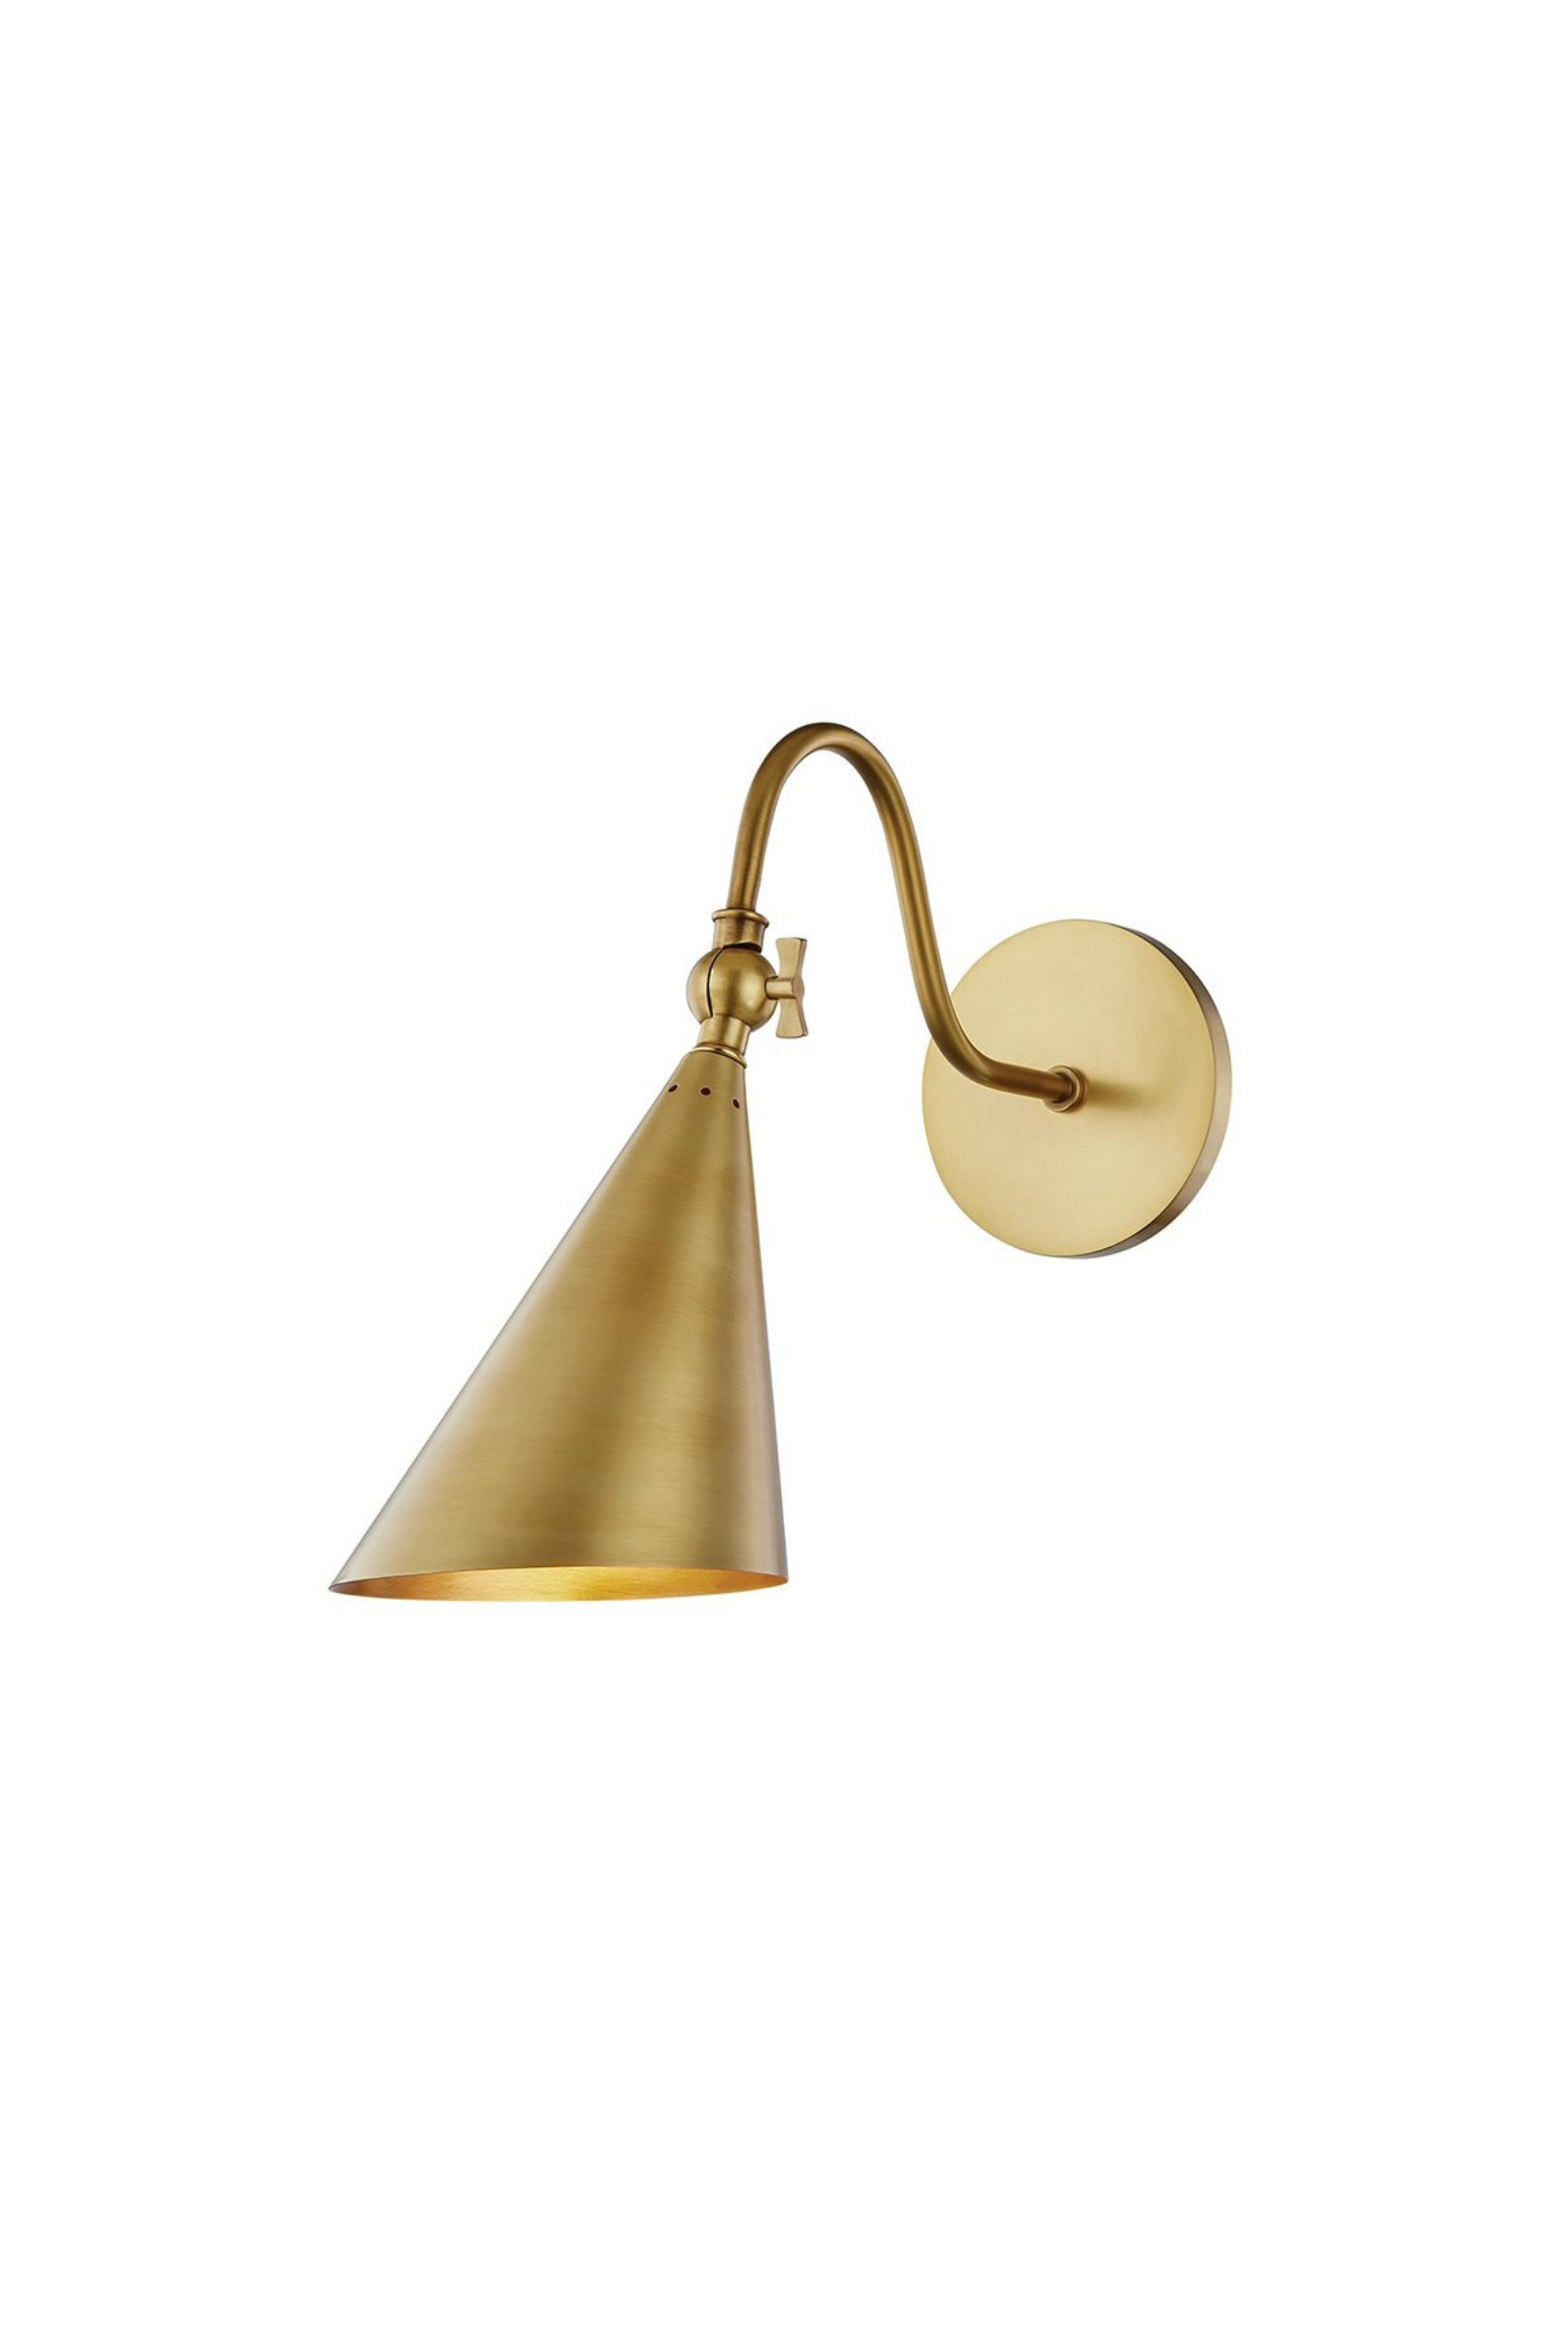 Rios Sconce - Aged Brass